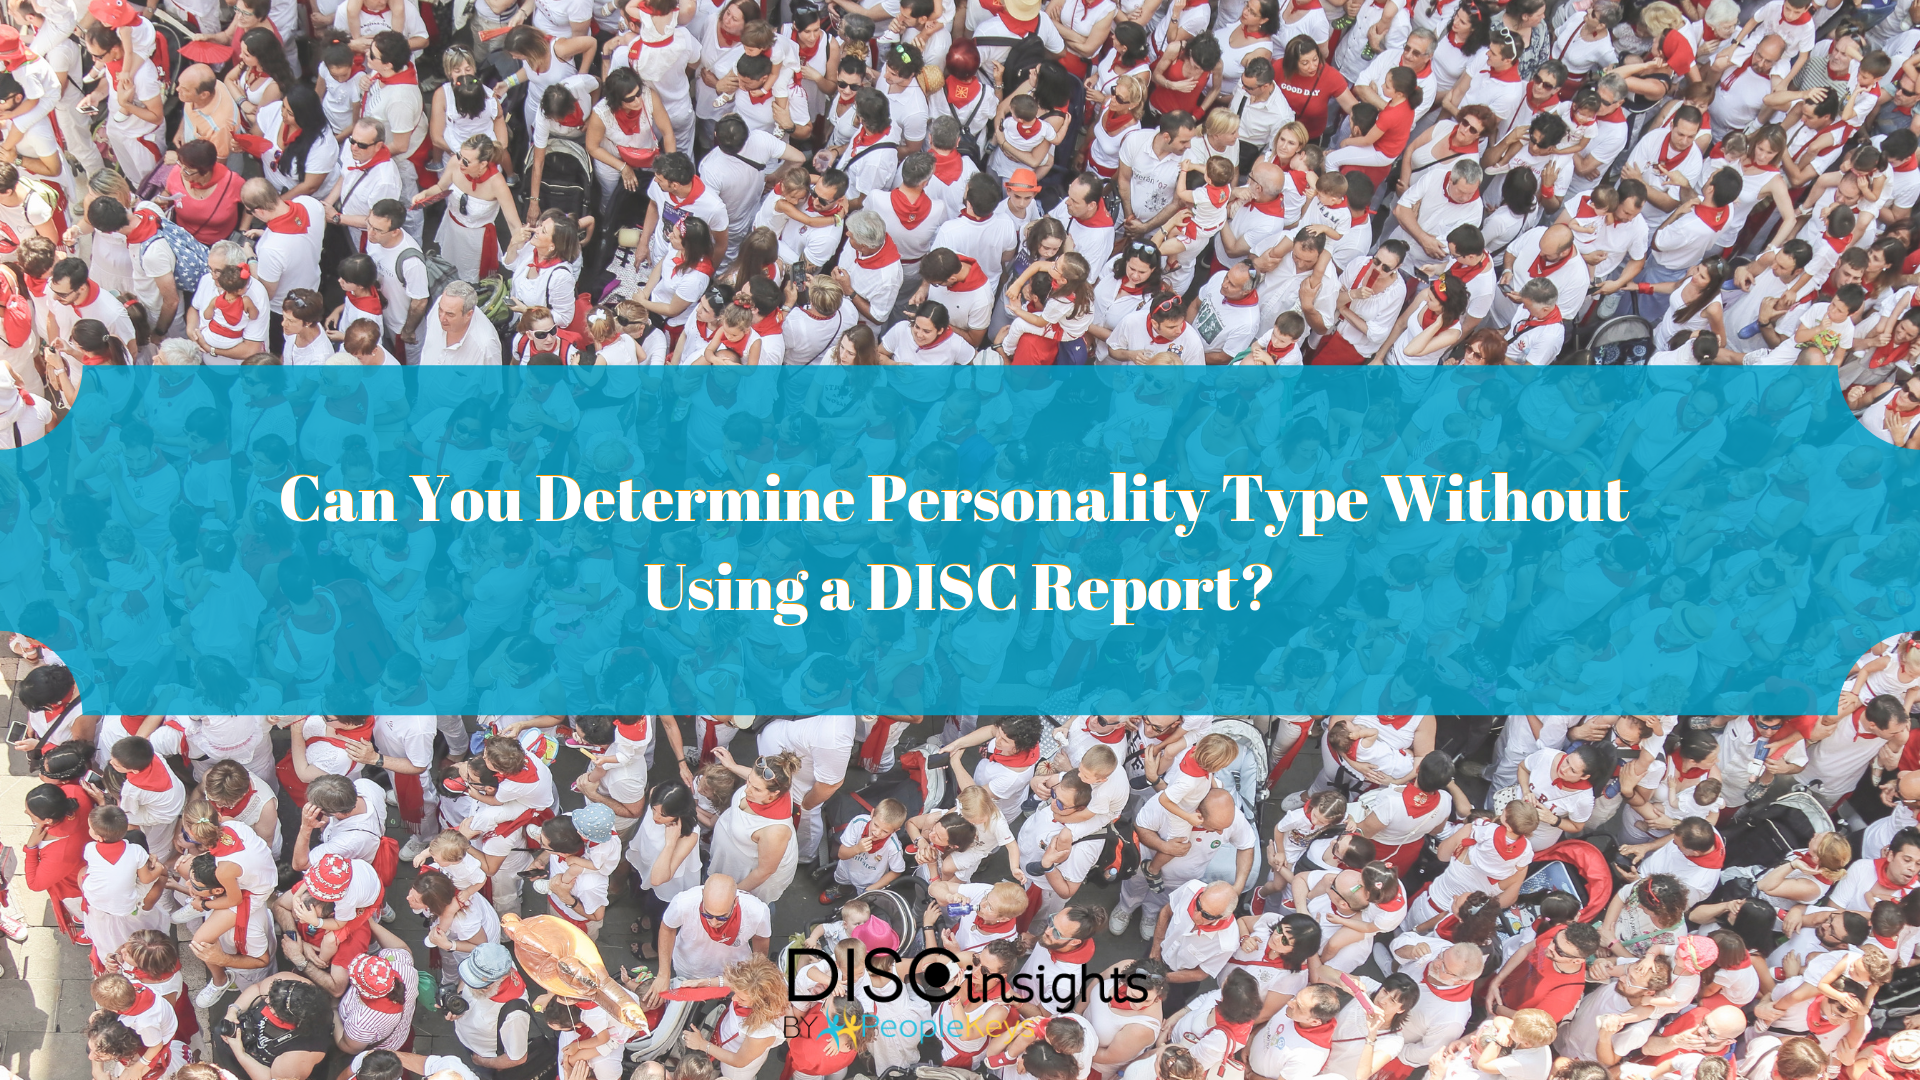 Can You Determine Personality Type Without Using a DISC Report